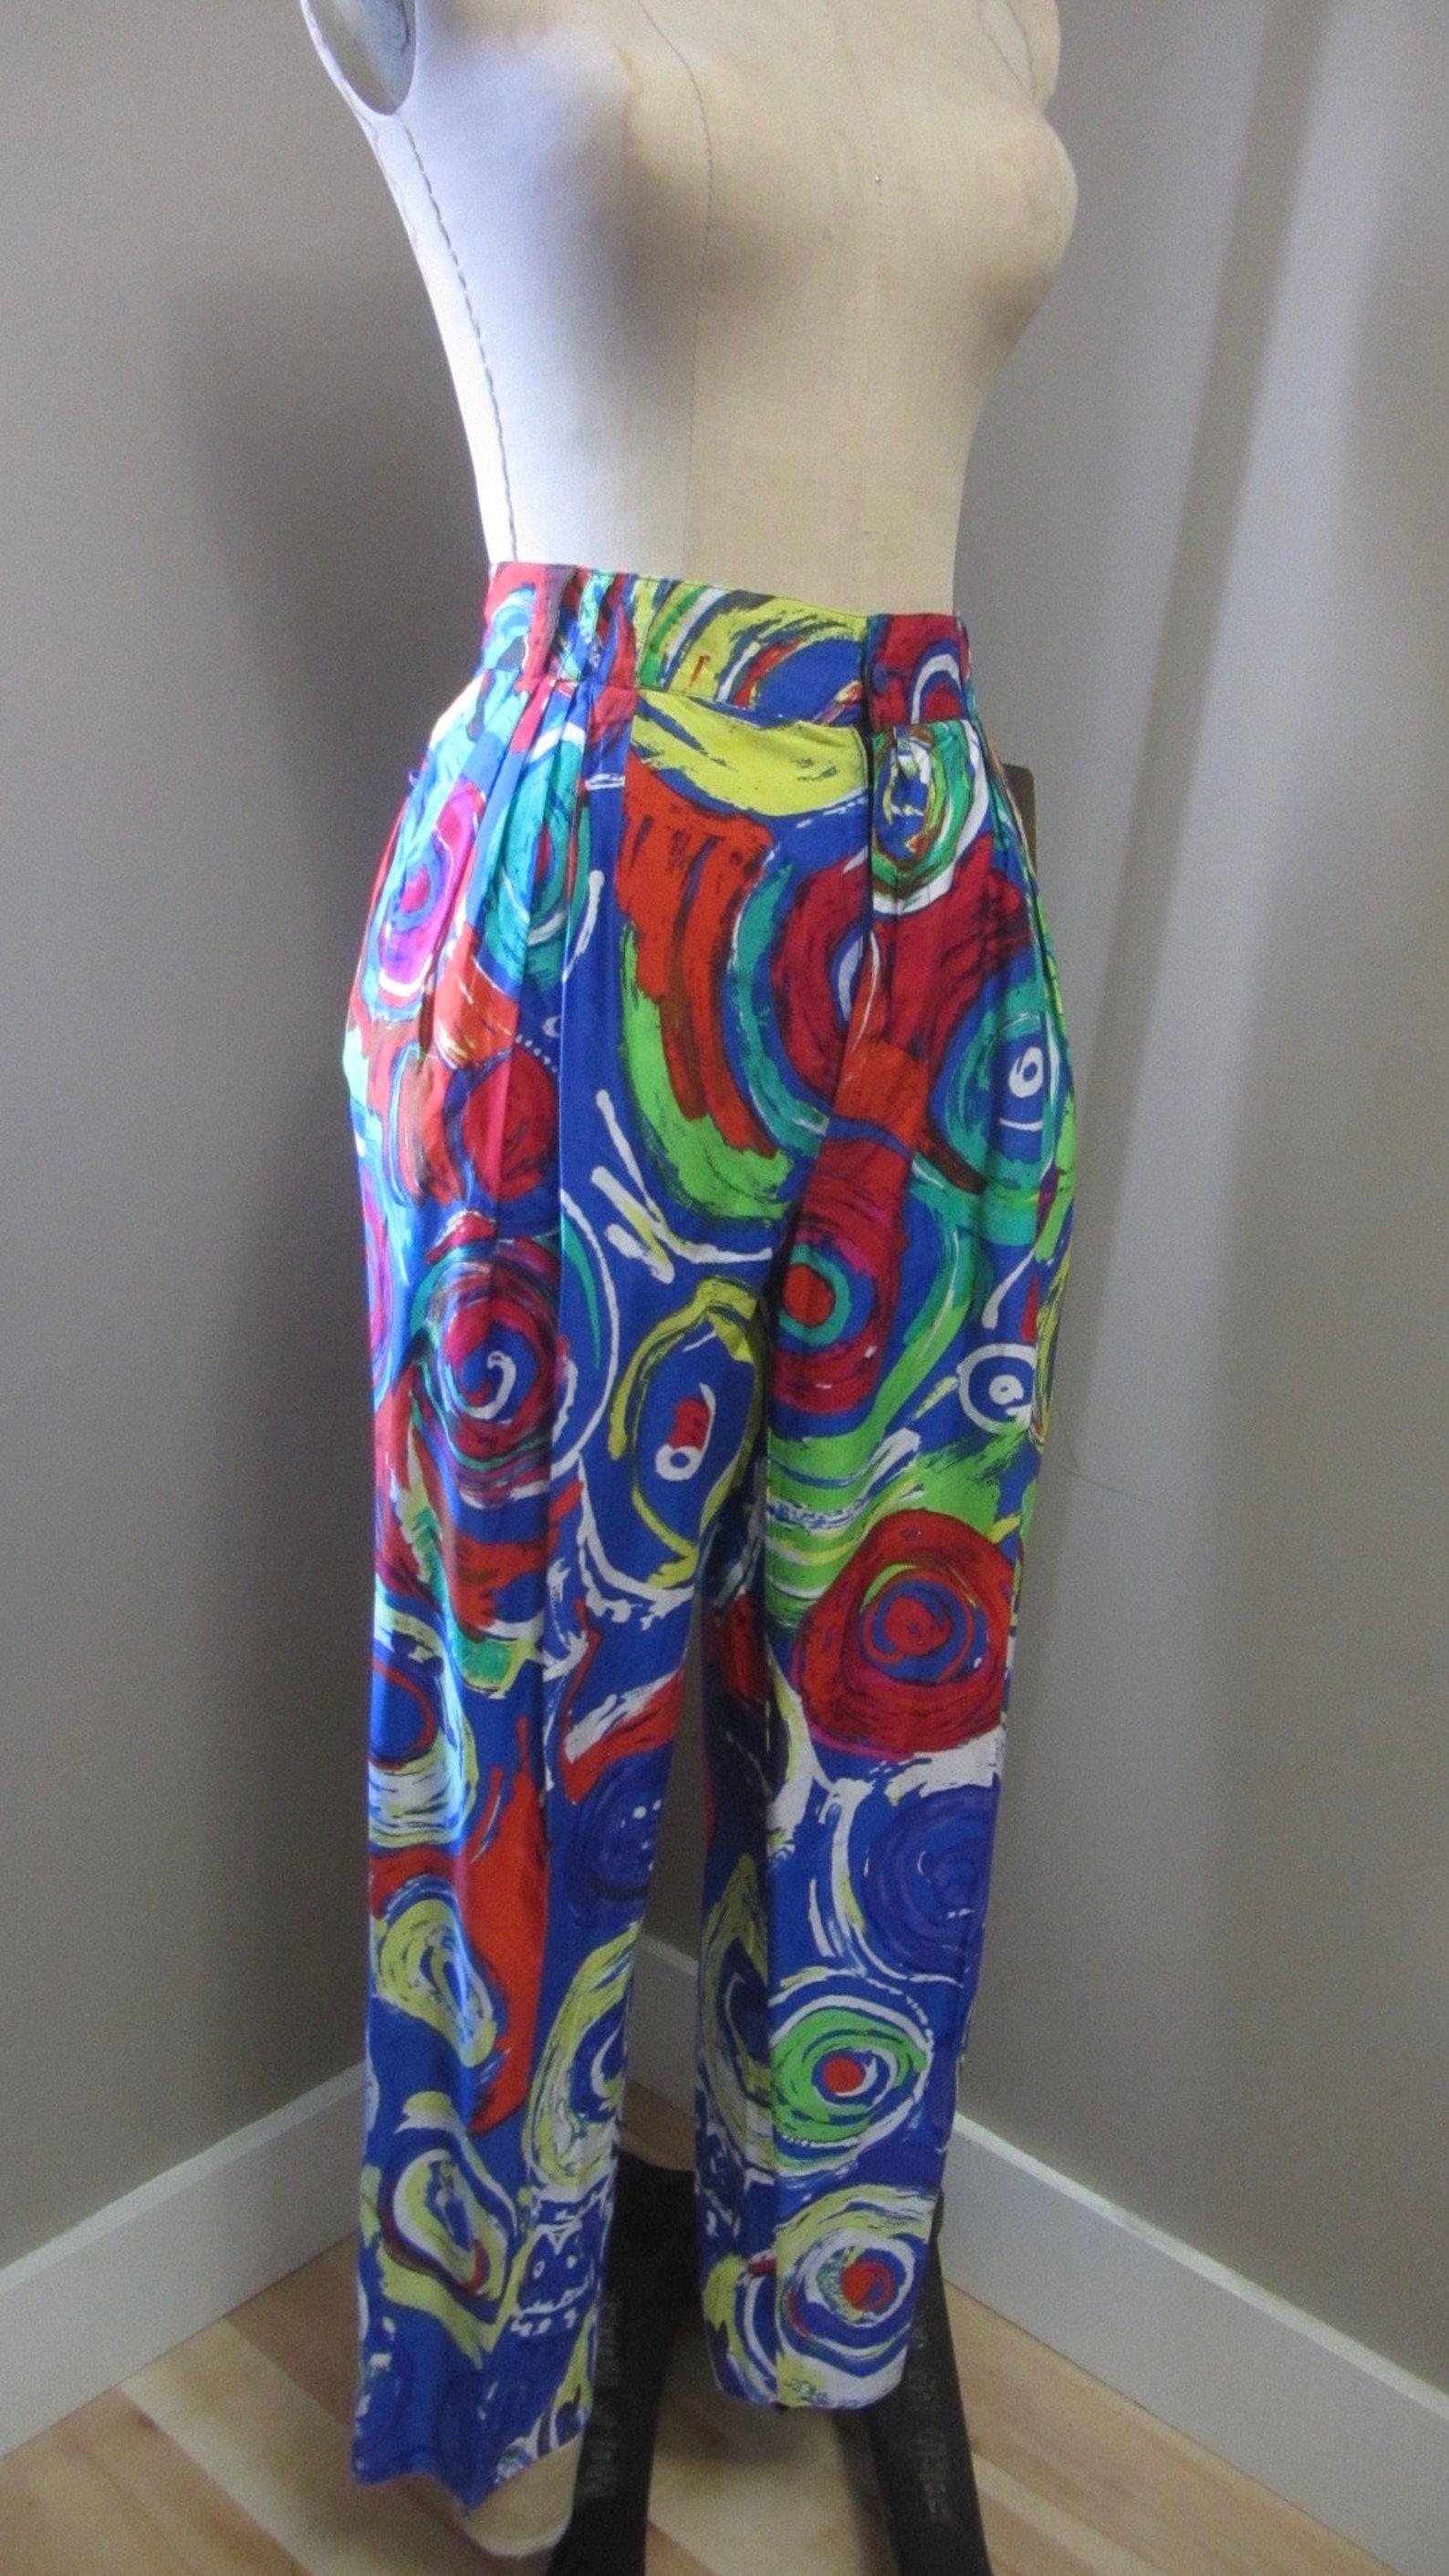 Gianni Versace Colorful Abstract Print Trousers, Circa 1991 For Sale 2